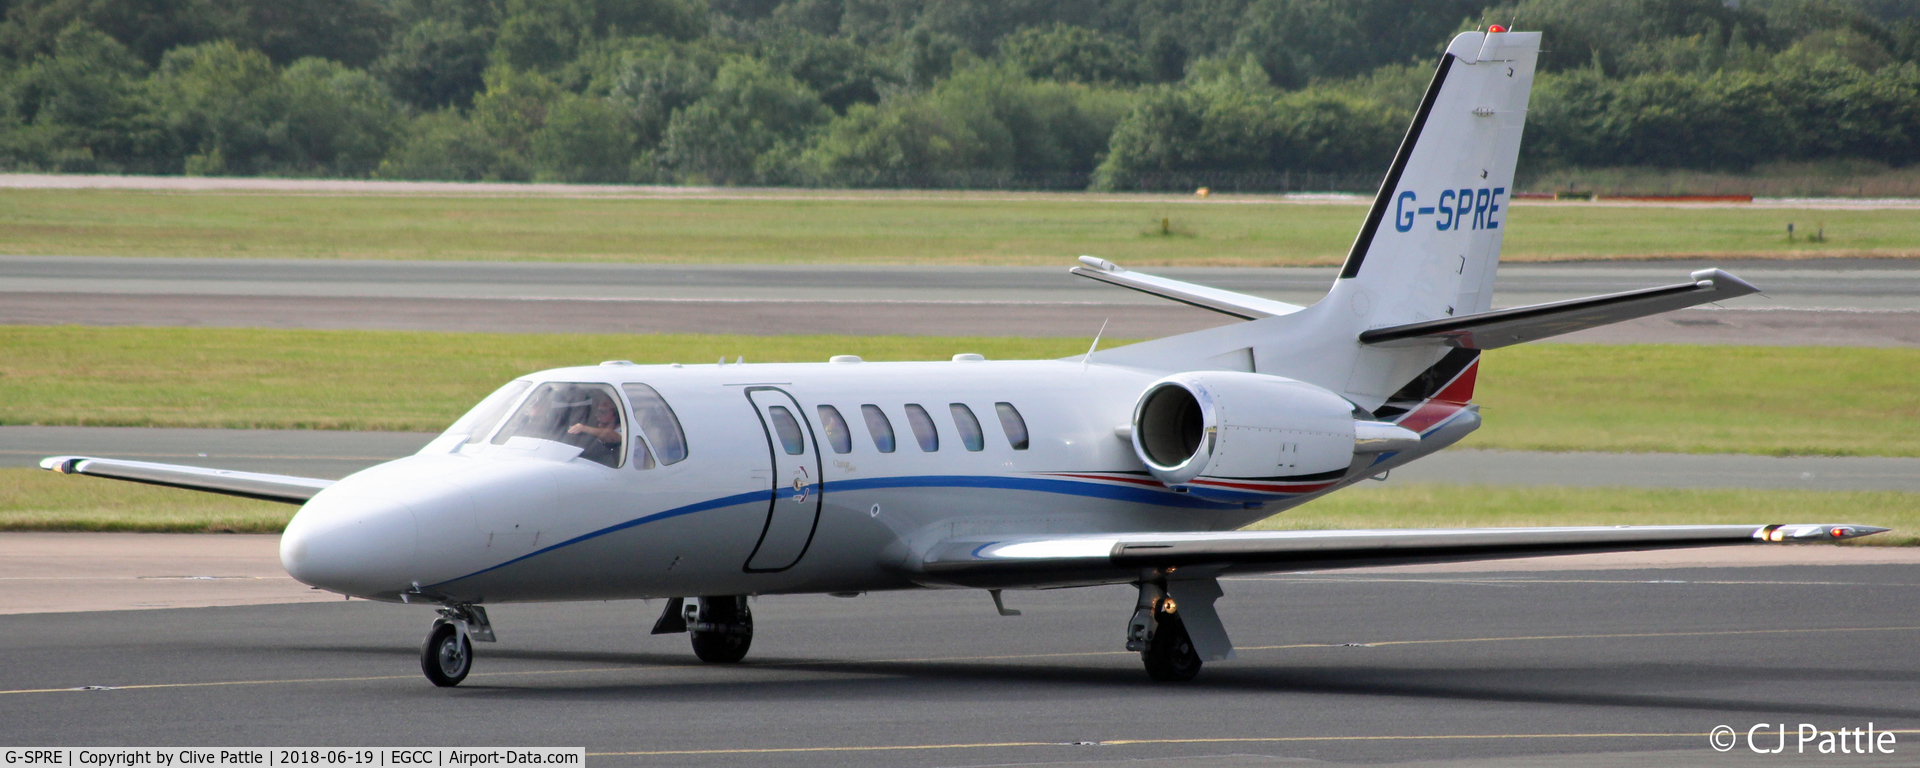 G-SPRE, 1999 Cessna 550 Citation Bravo C/N 550-0872, In action at Manchester